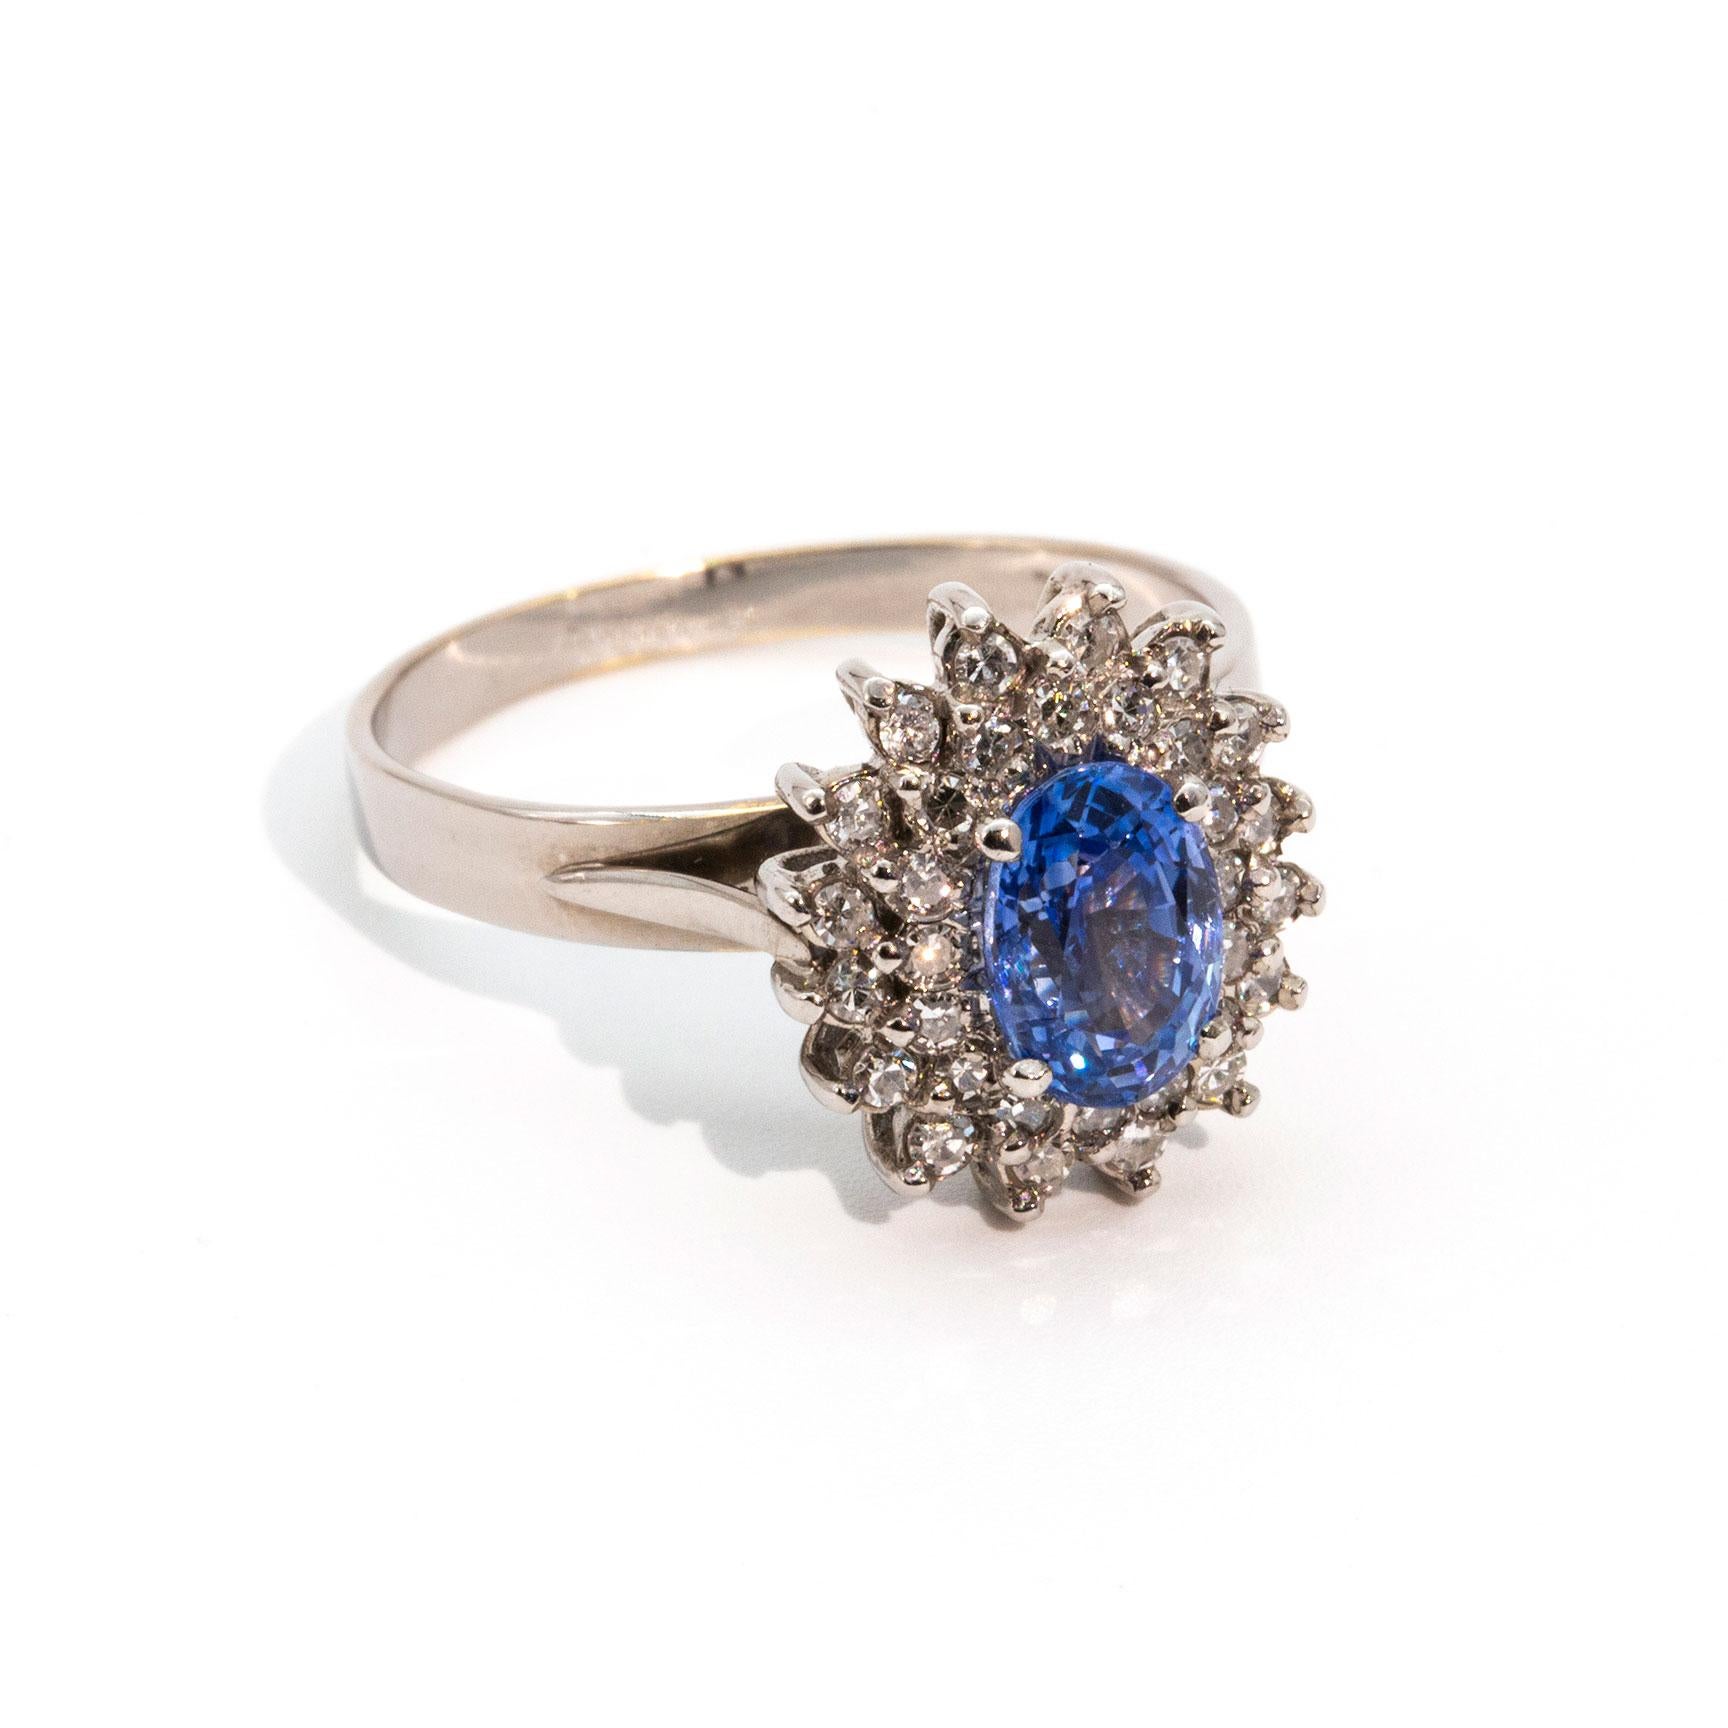 This timeless cluster ring is forged in 18 carat white gold and features a stunning 1.30 carat Ceylon sapphire and is surrounded by a double border of glimmering round diamonds. We named this beauty The Journee Ring.  The Journee Ring is a classic